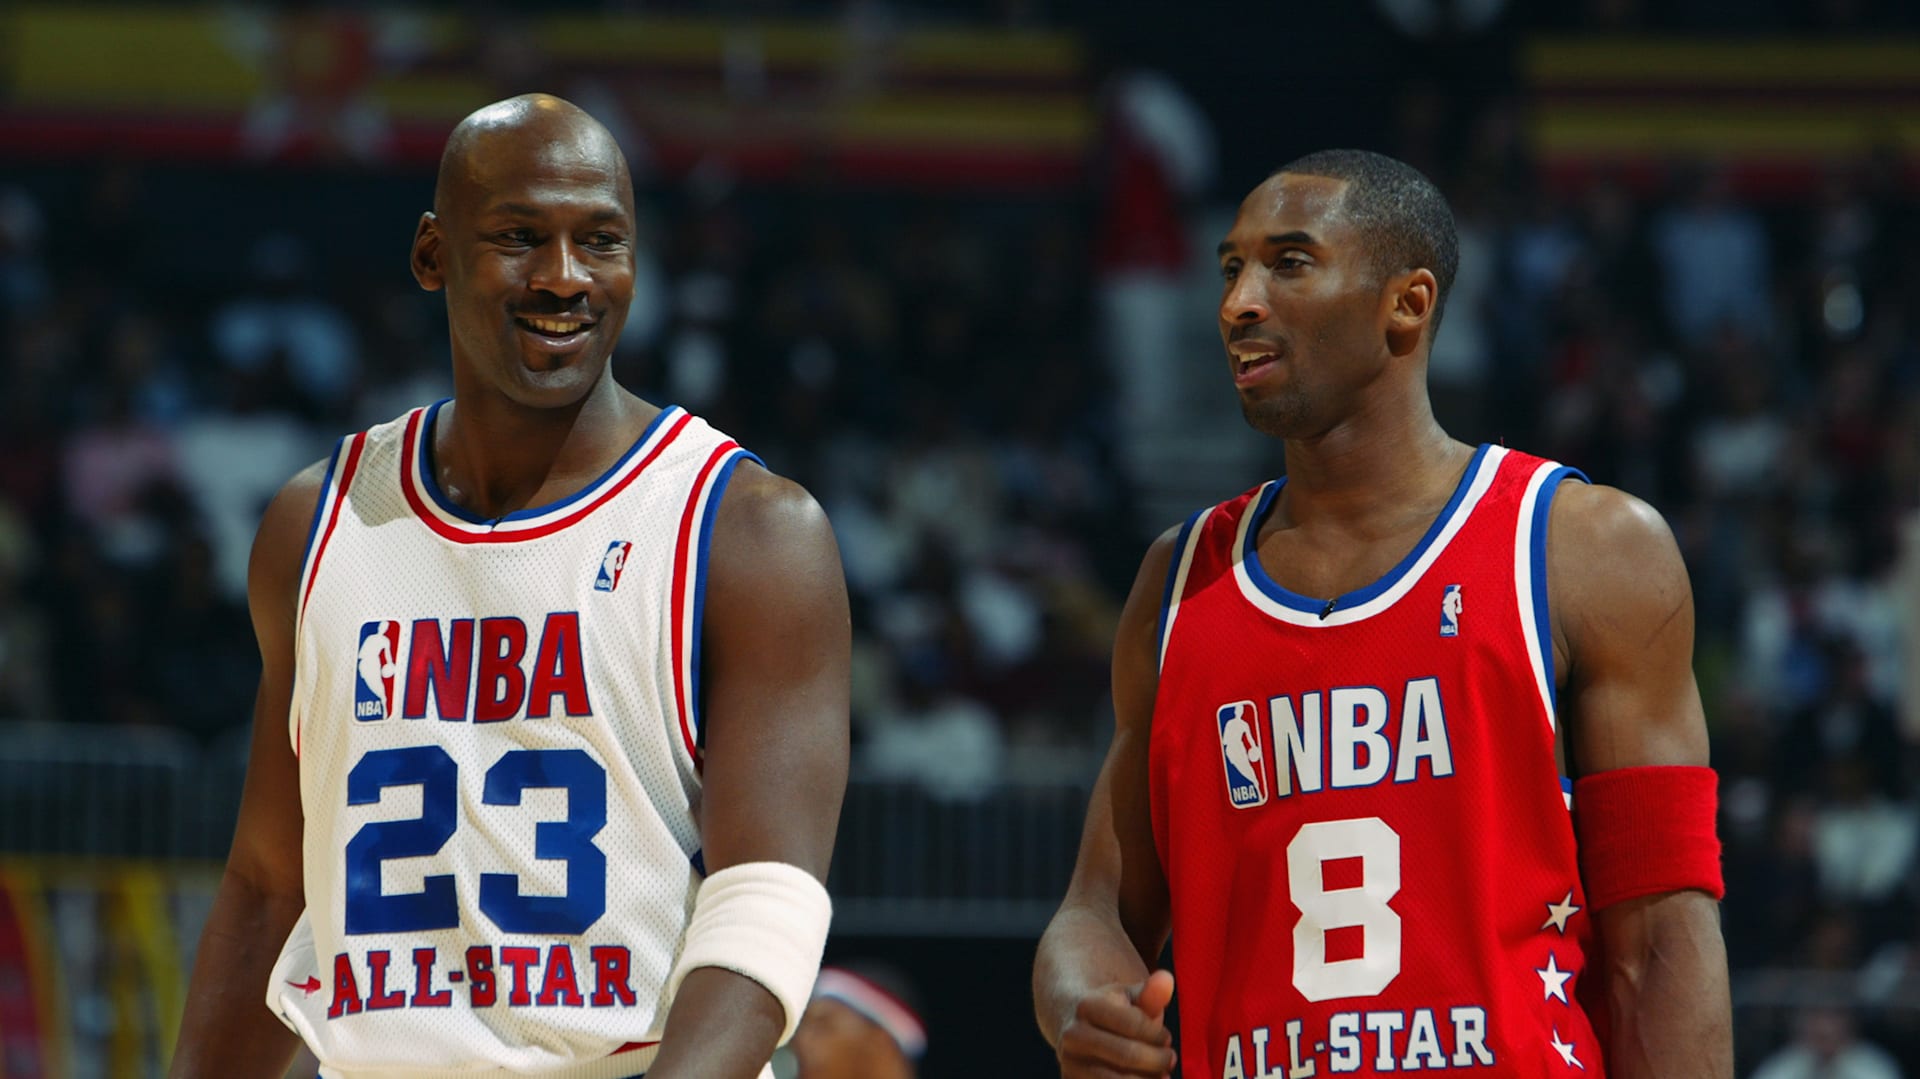 NBA All-Stars who are Olympic medallists: Full list